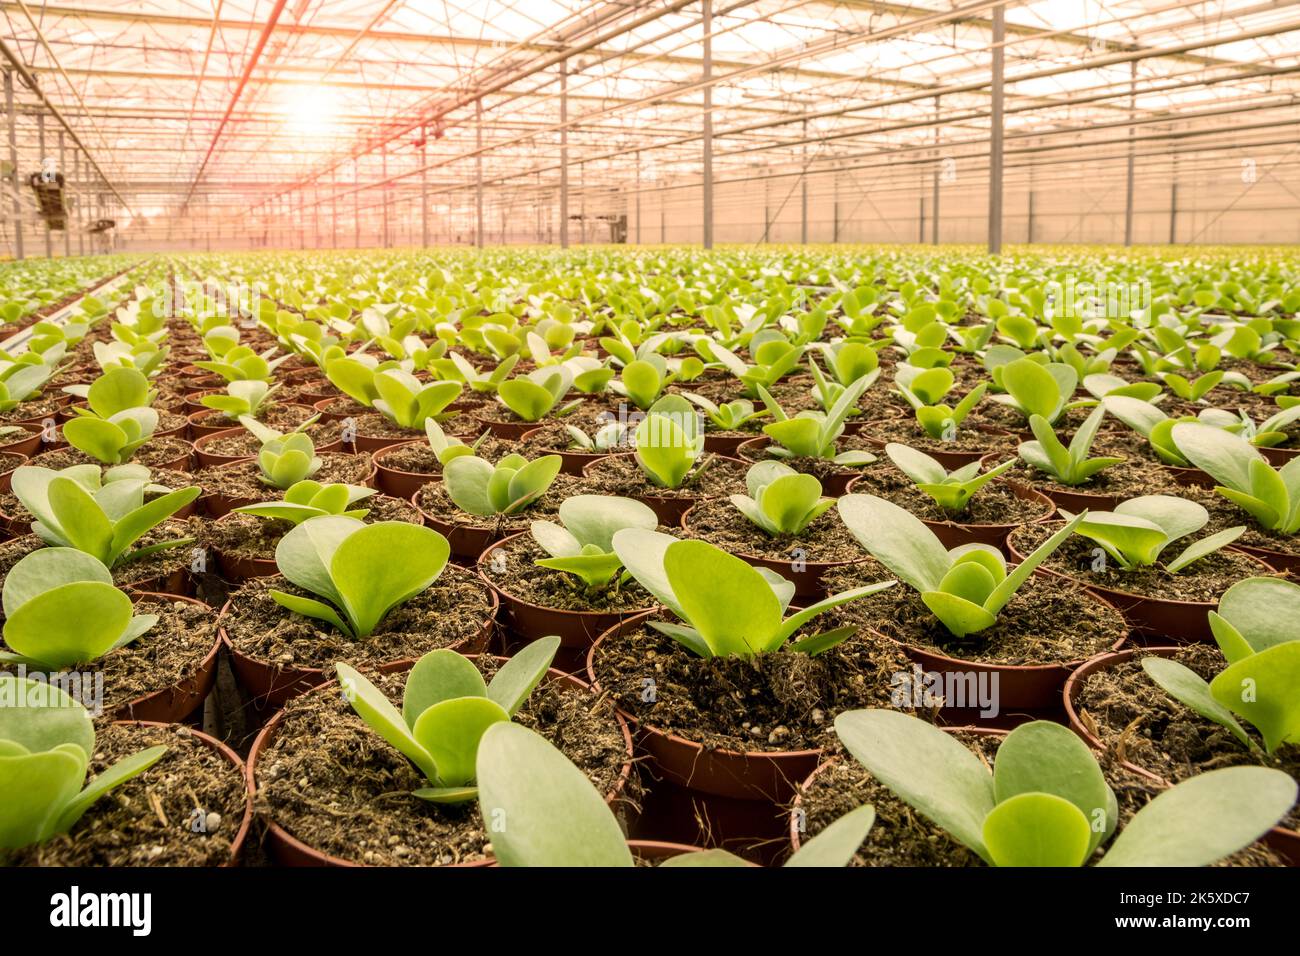 Industrial greenhouse with rows of cultivation. Stock Photo